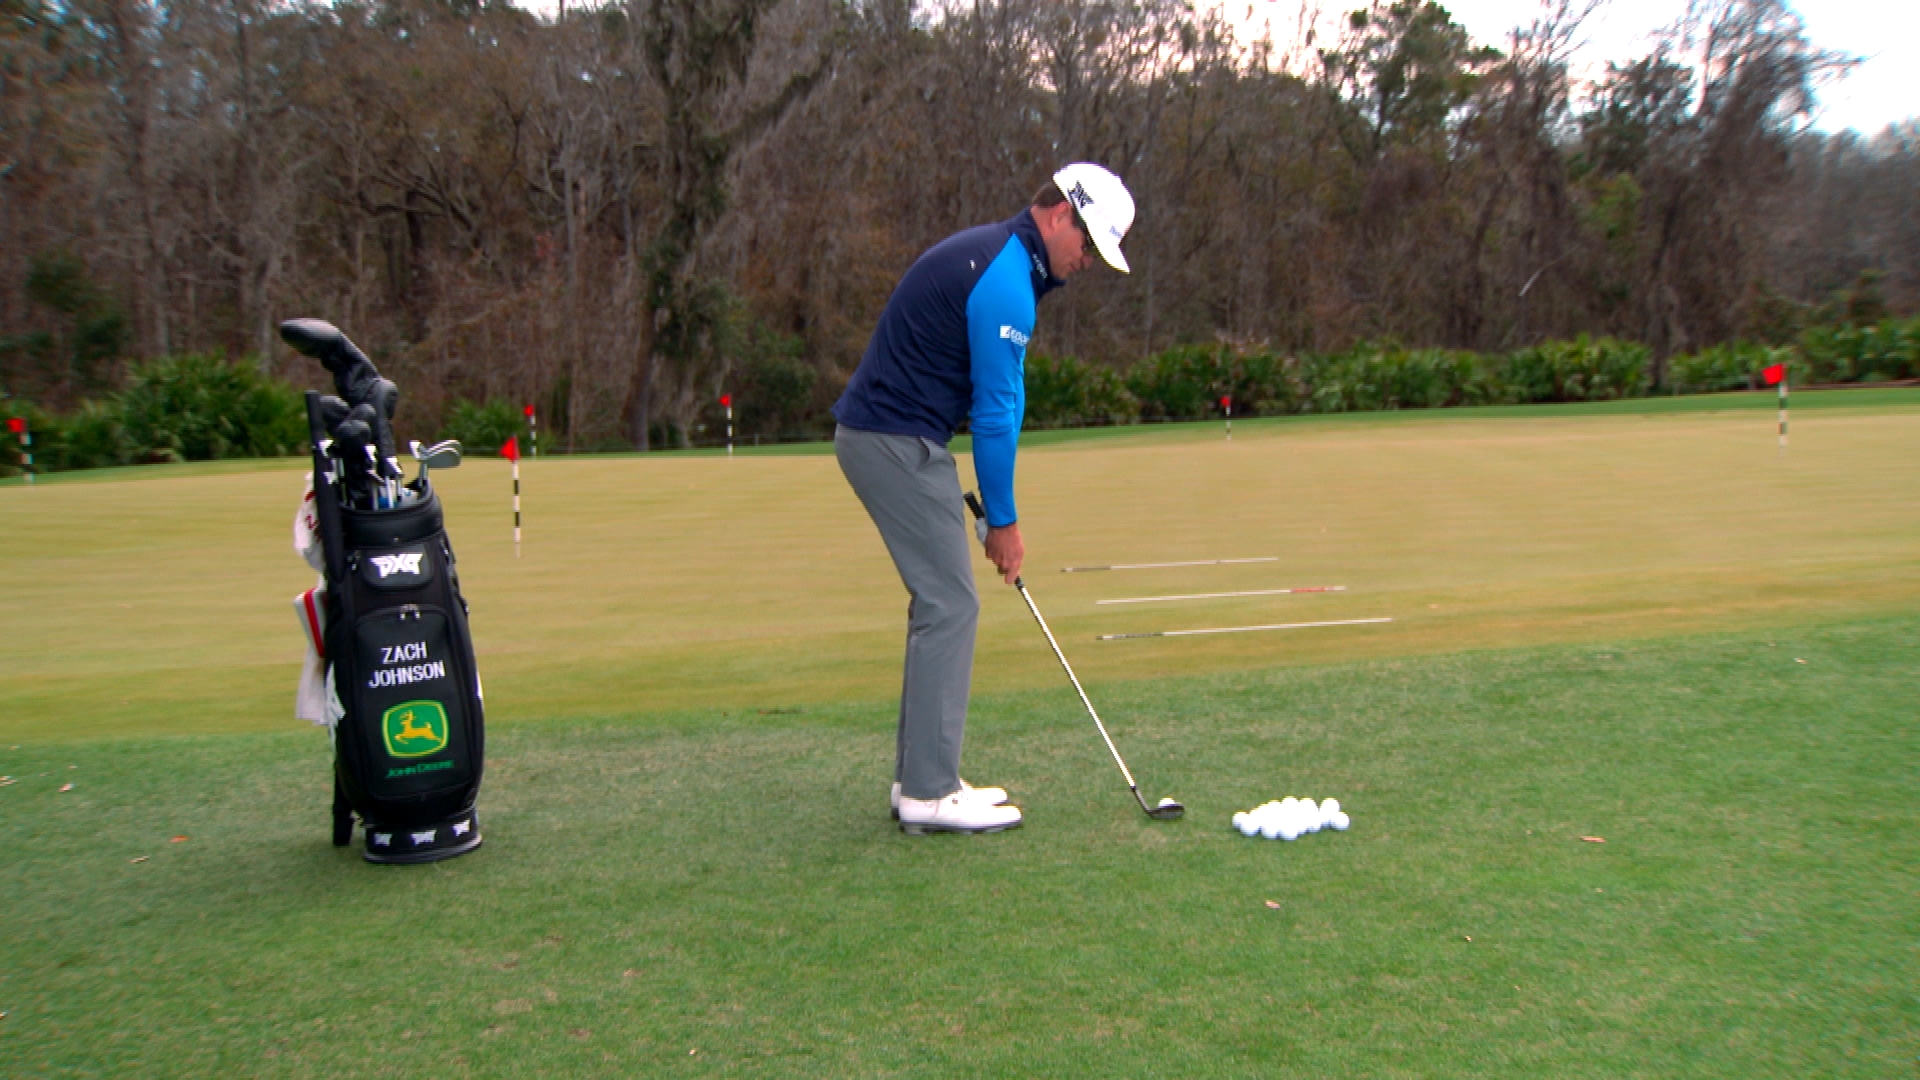 Learn short game practice tips from Zach Johnson | Golf Channel